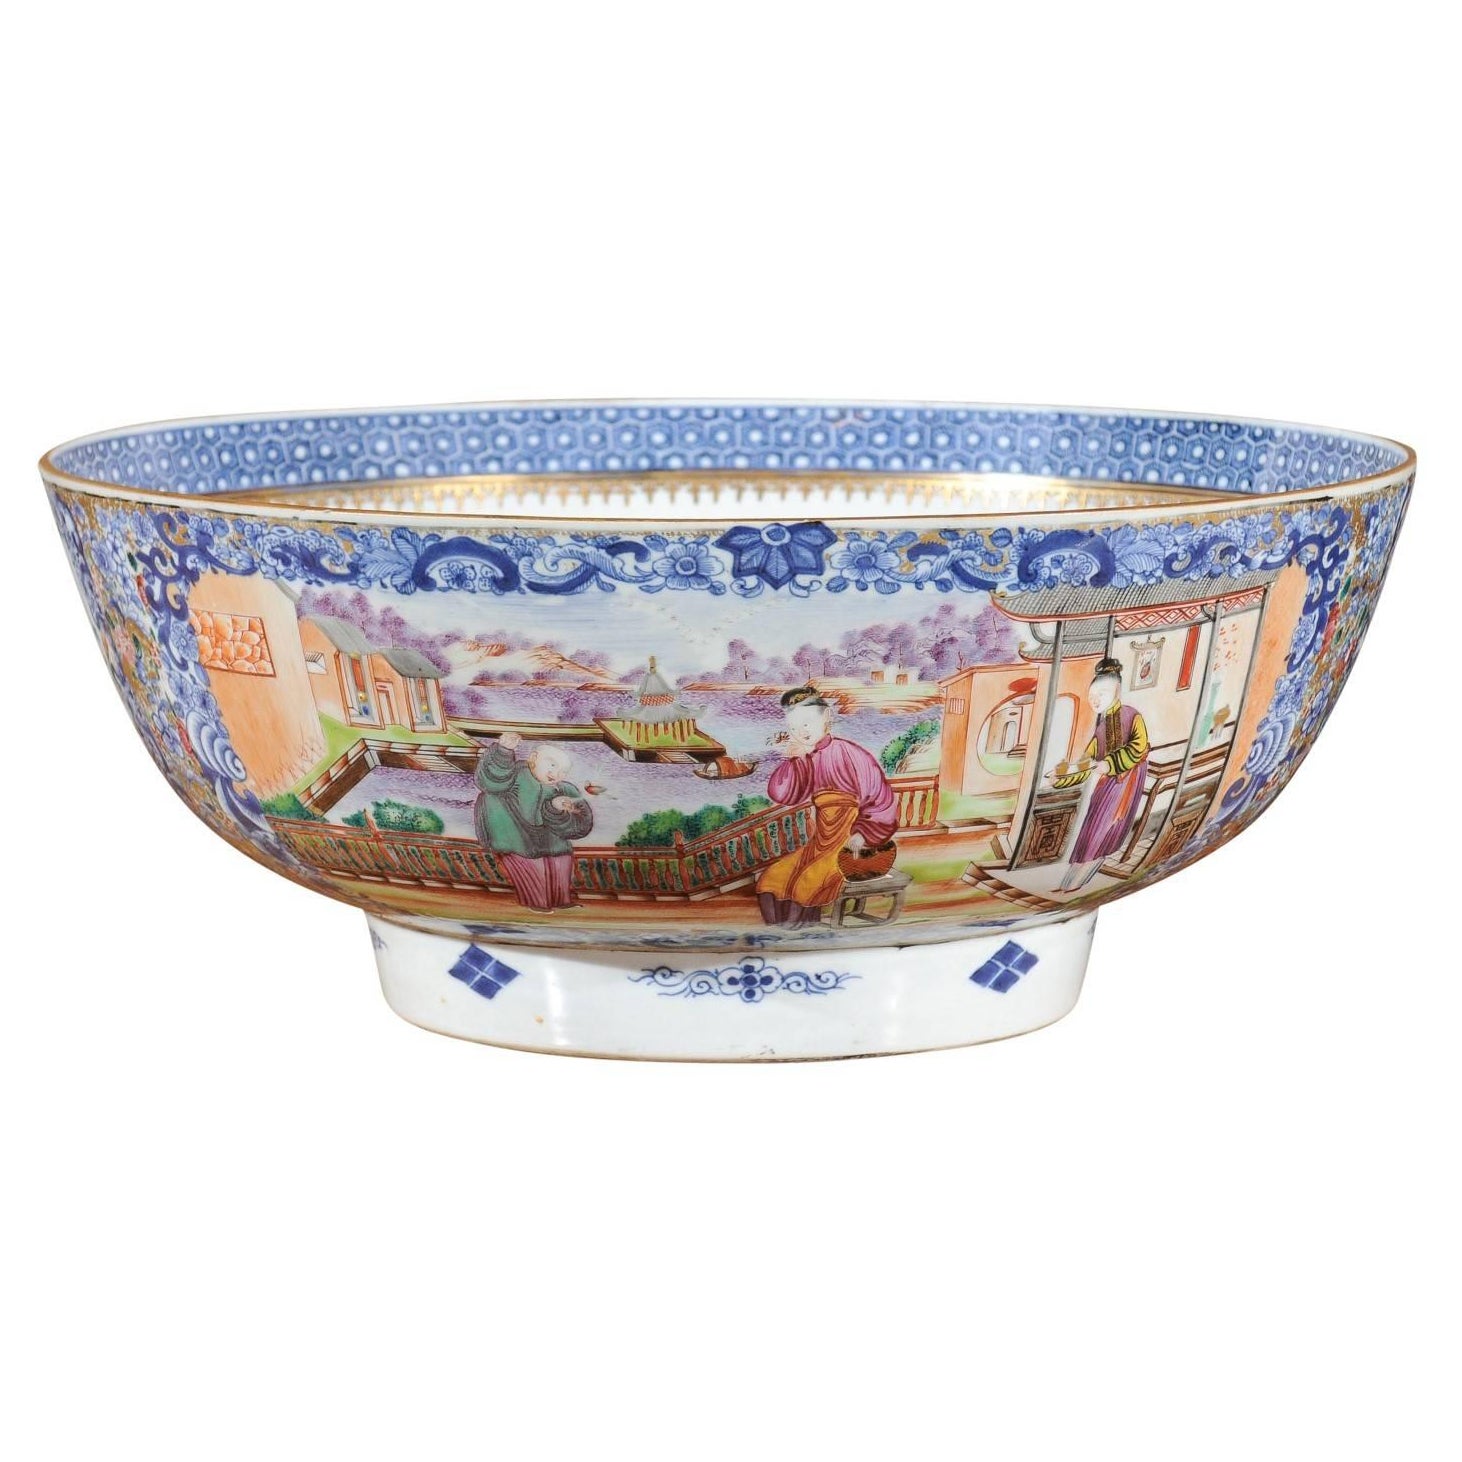 Large Chinese Export Punch Bowl in Mandarin Palette & Gilt Accents, ca. 1780